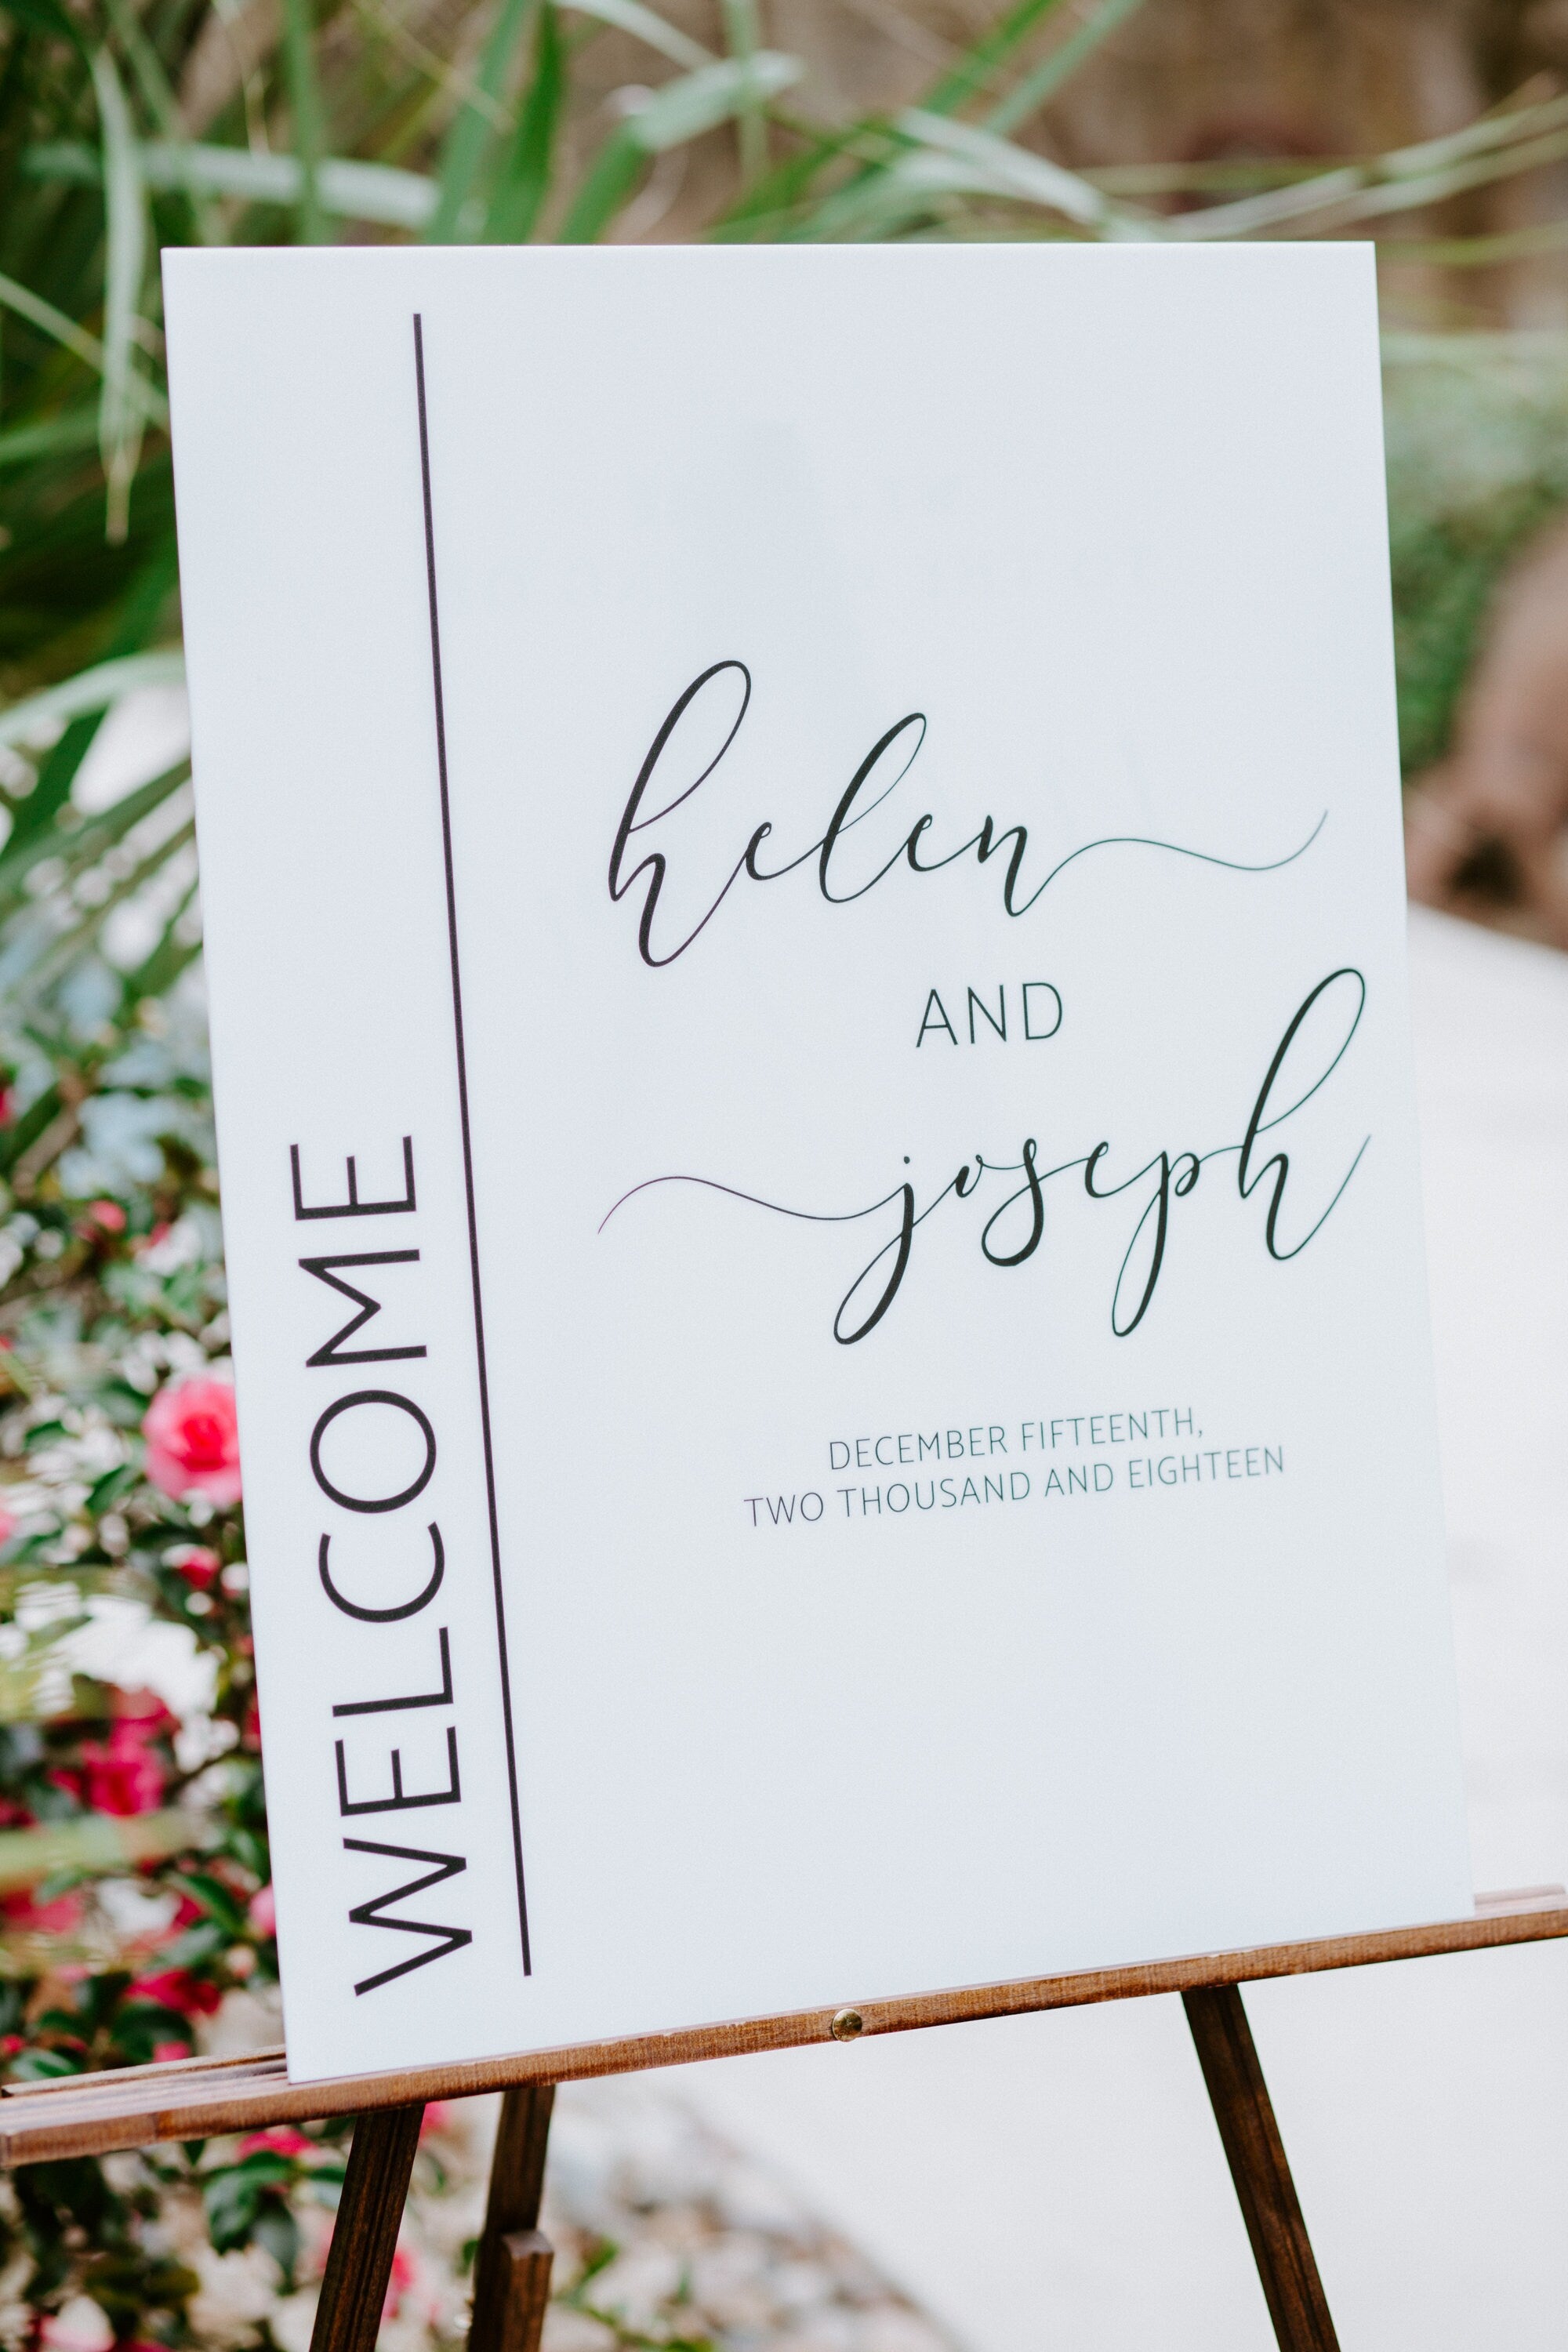 Acrylic Wedding Welcome Sign, 18x24 Clear Glass Look Personalized Perspex Modern Wedding Welcome Sign Decoration for Display, AD Wreath